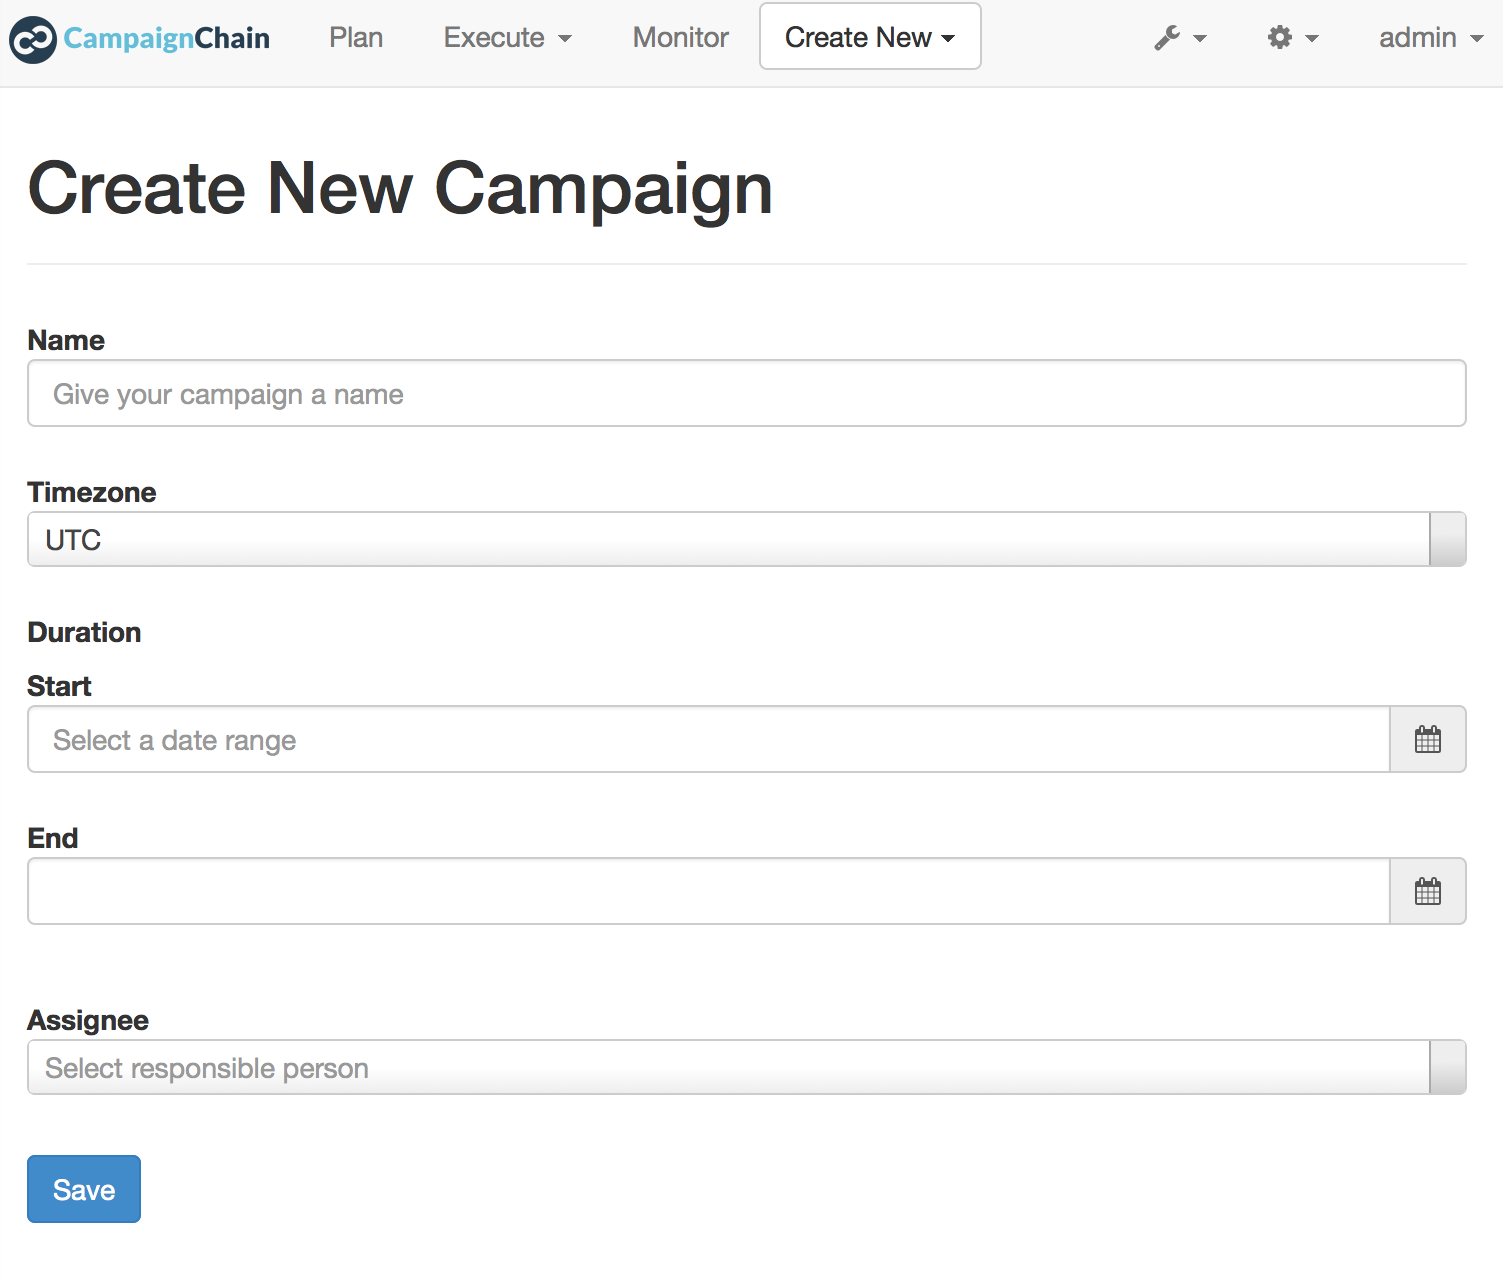 ../_images/create_new_campaign_form.png